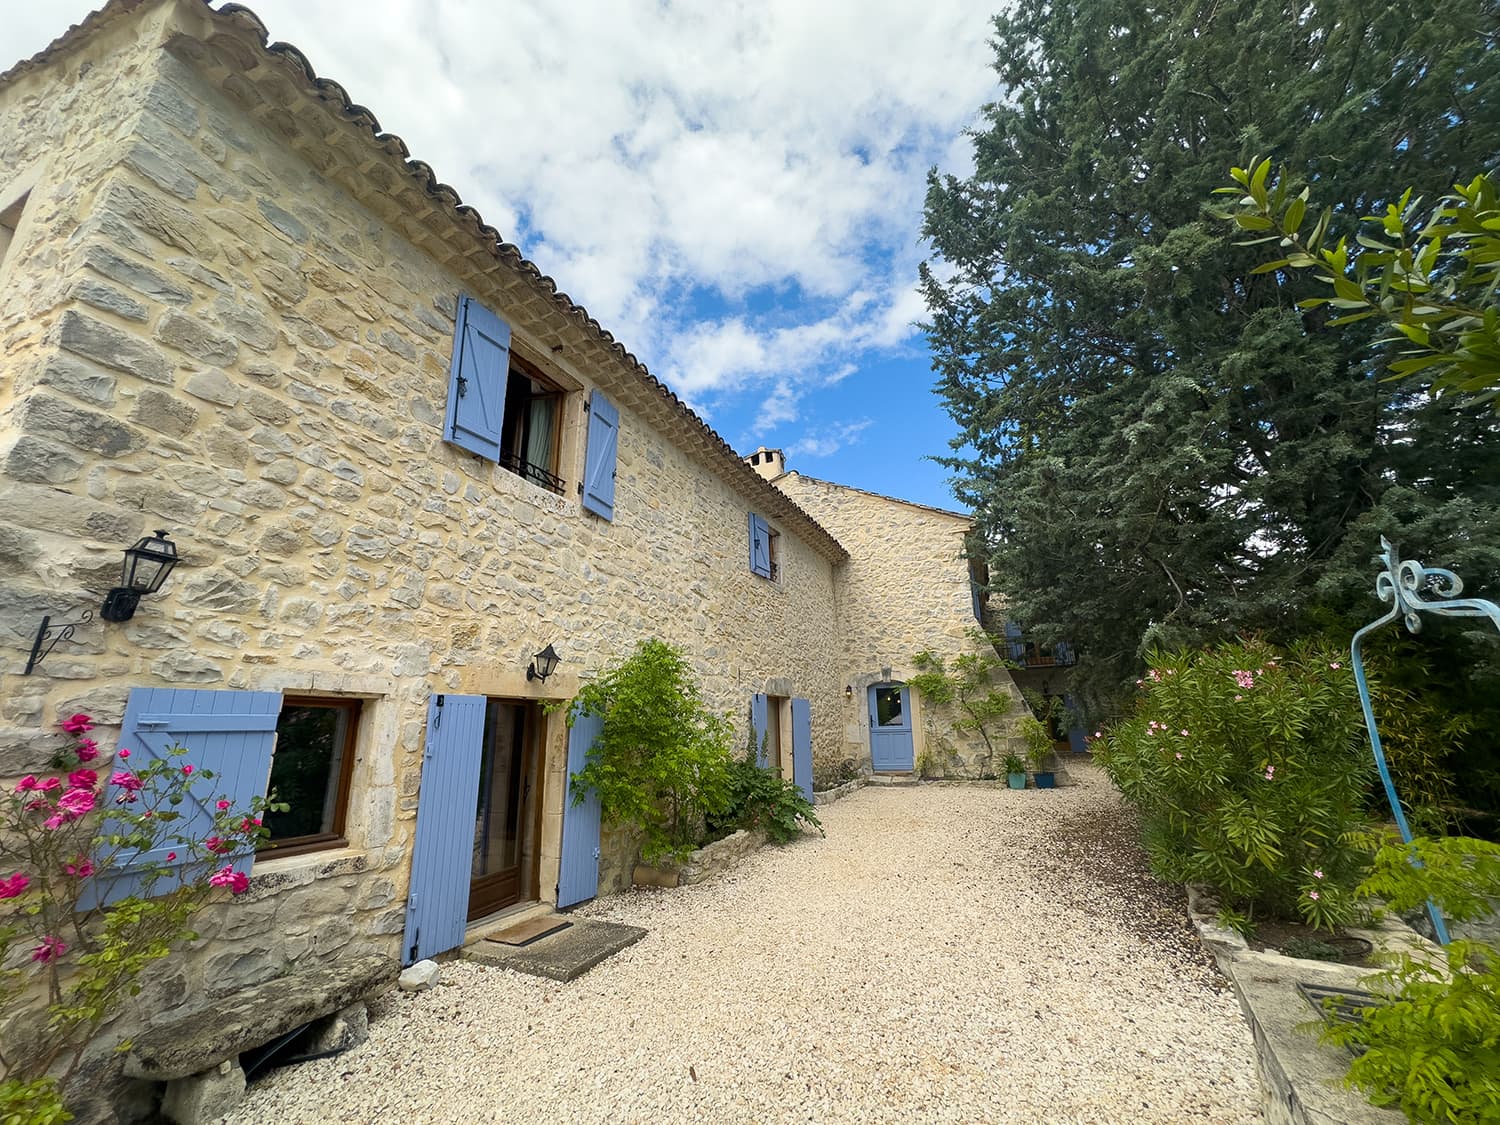 Holiday home in Gard, South of France